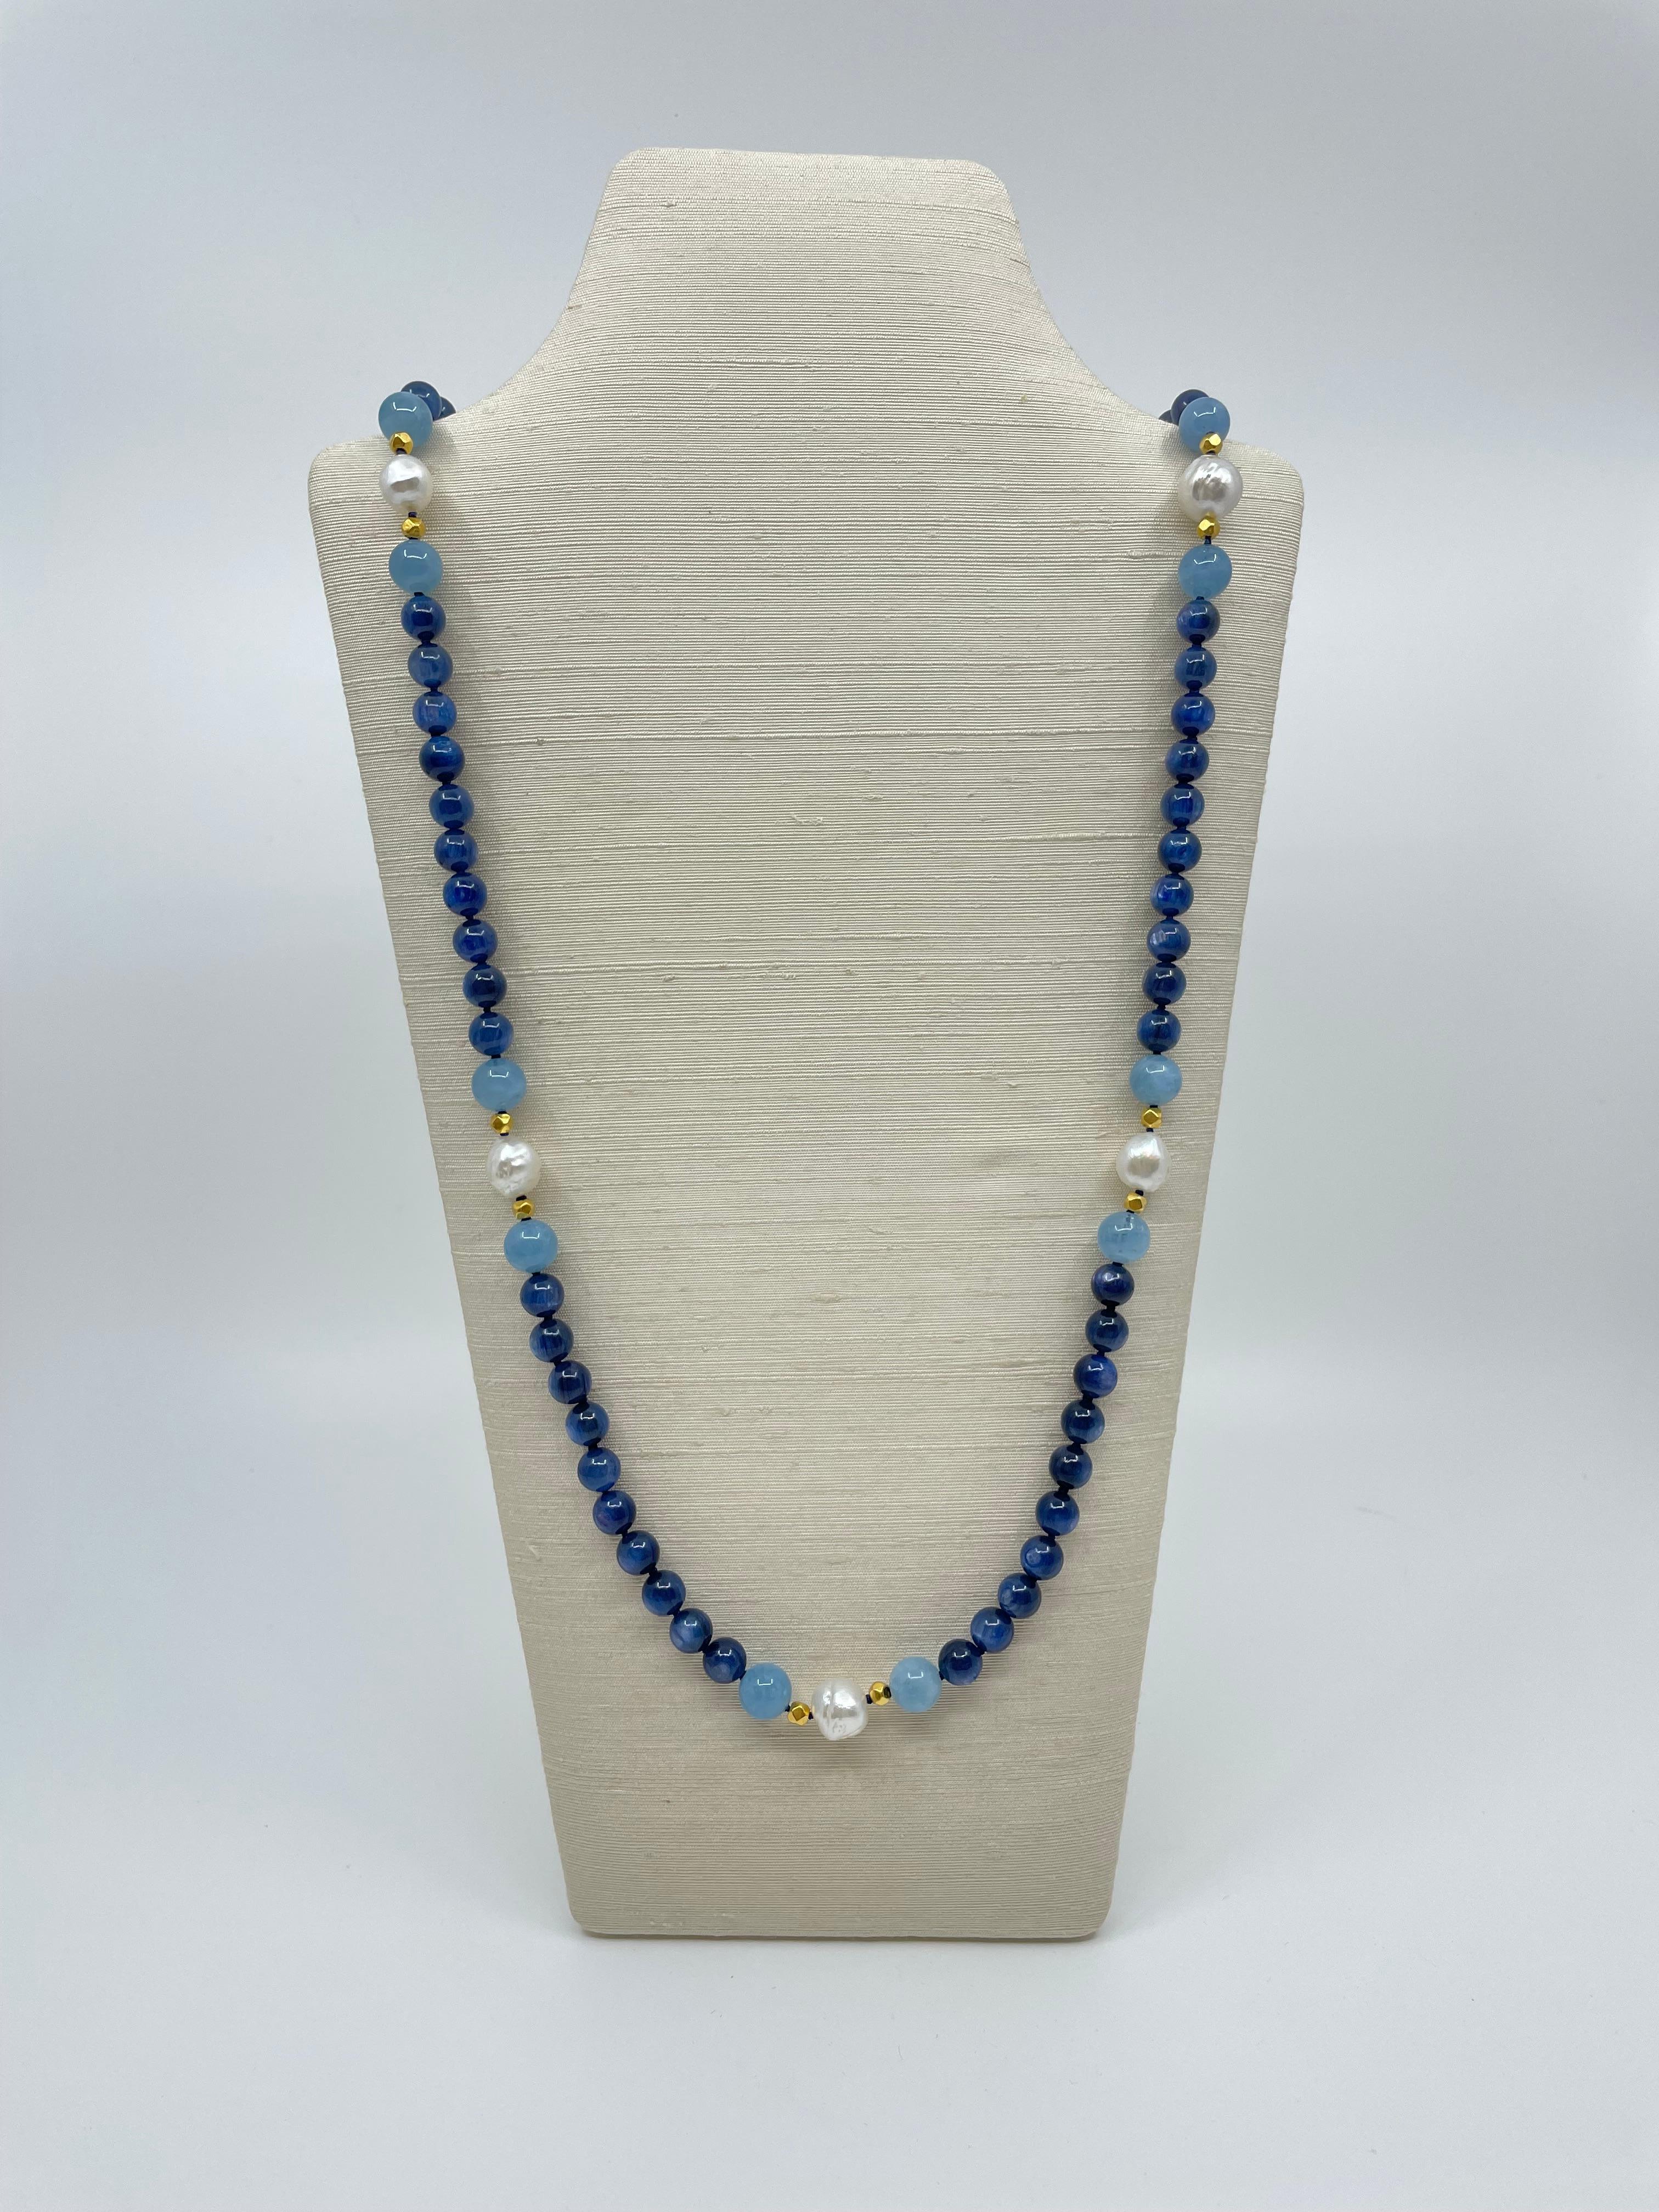 From our Amalfi collection, the fabulous necklace is handcrafted with vibrant blue kyanite beads, interspaced with six groups of soft blue aquamarine beads and solid 18K gold beads with South Sea pearl in the middle, and aquamarine beads at the ends